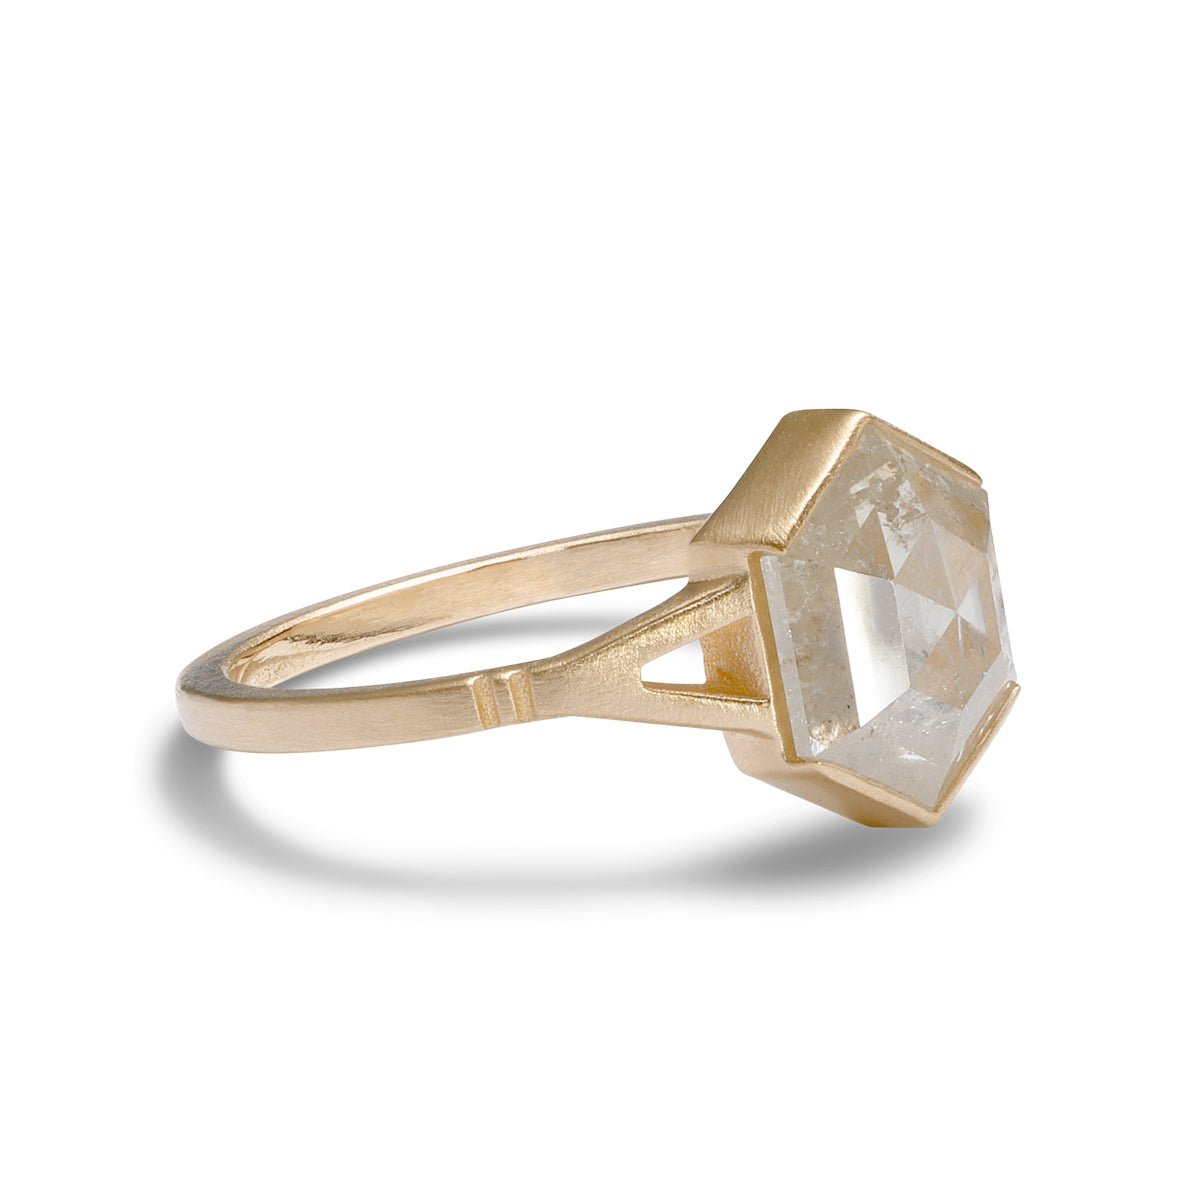 Hexagon salt & pepper diamond Dea ring. Features a split shank in 14K gold. Designed and handcrafted in Portland, Oregon.